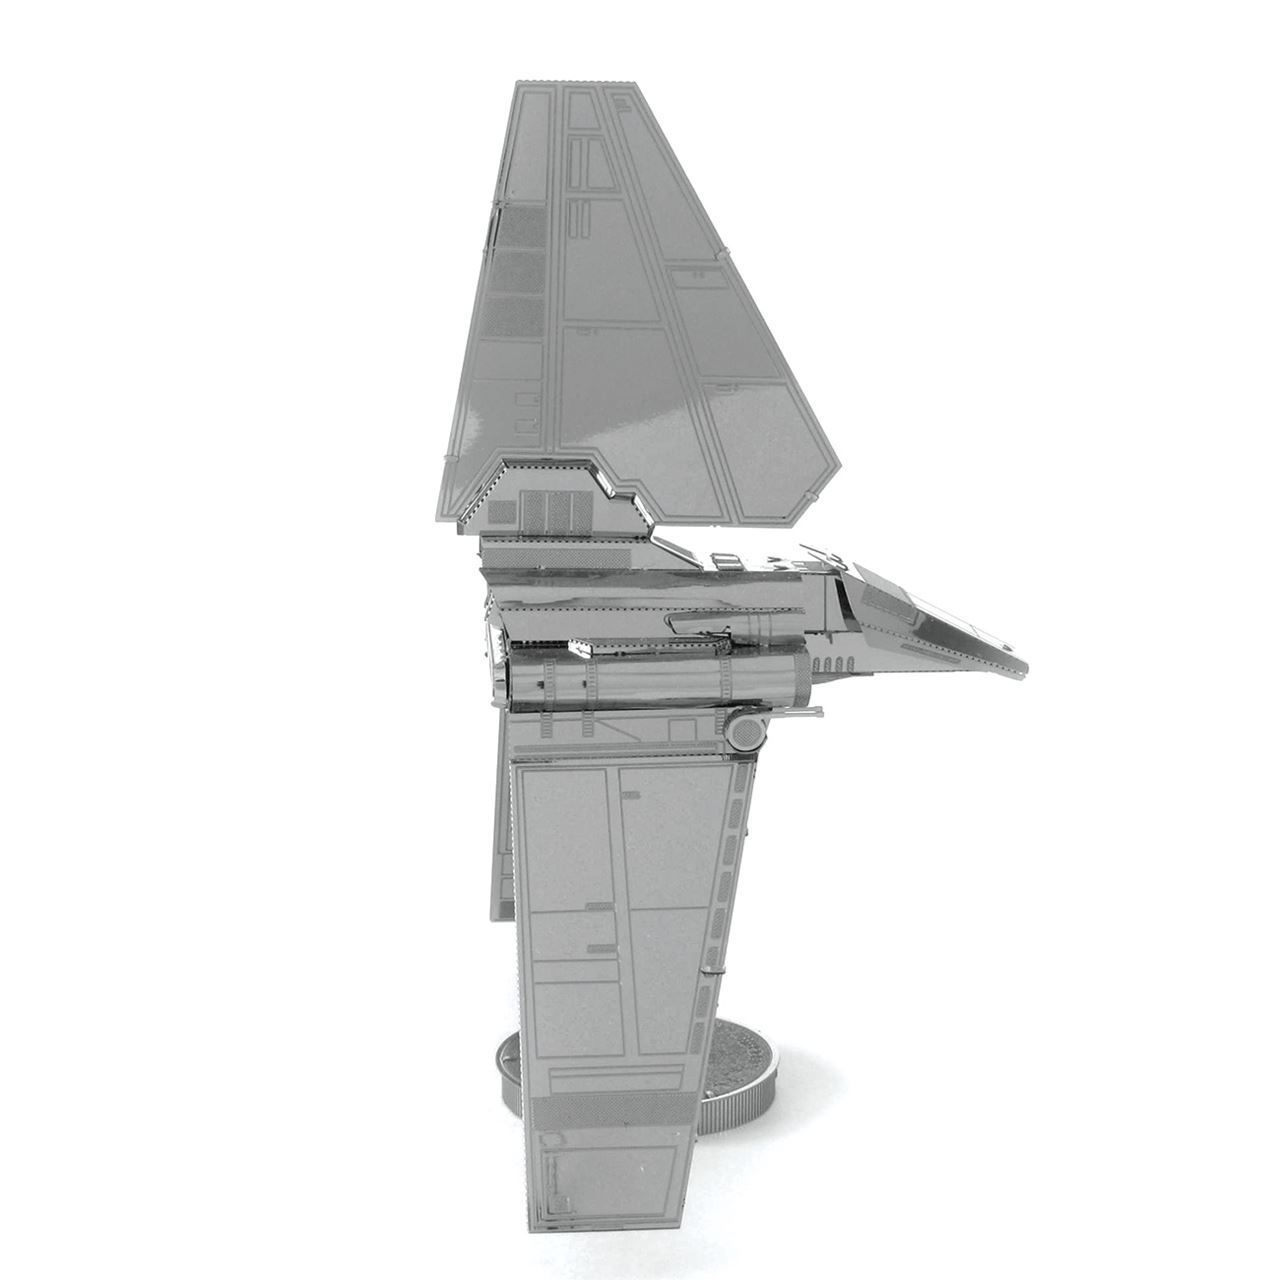 Fascinations Star Wars Imperial Shuttle Metal Earth 3D Model Kit New MMS259Ages 